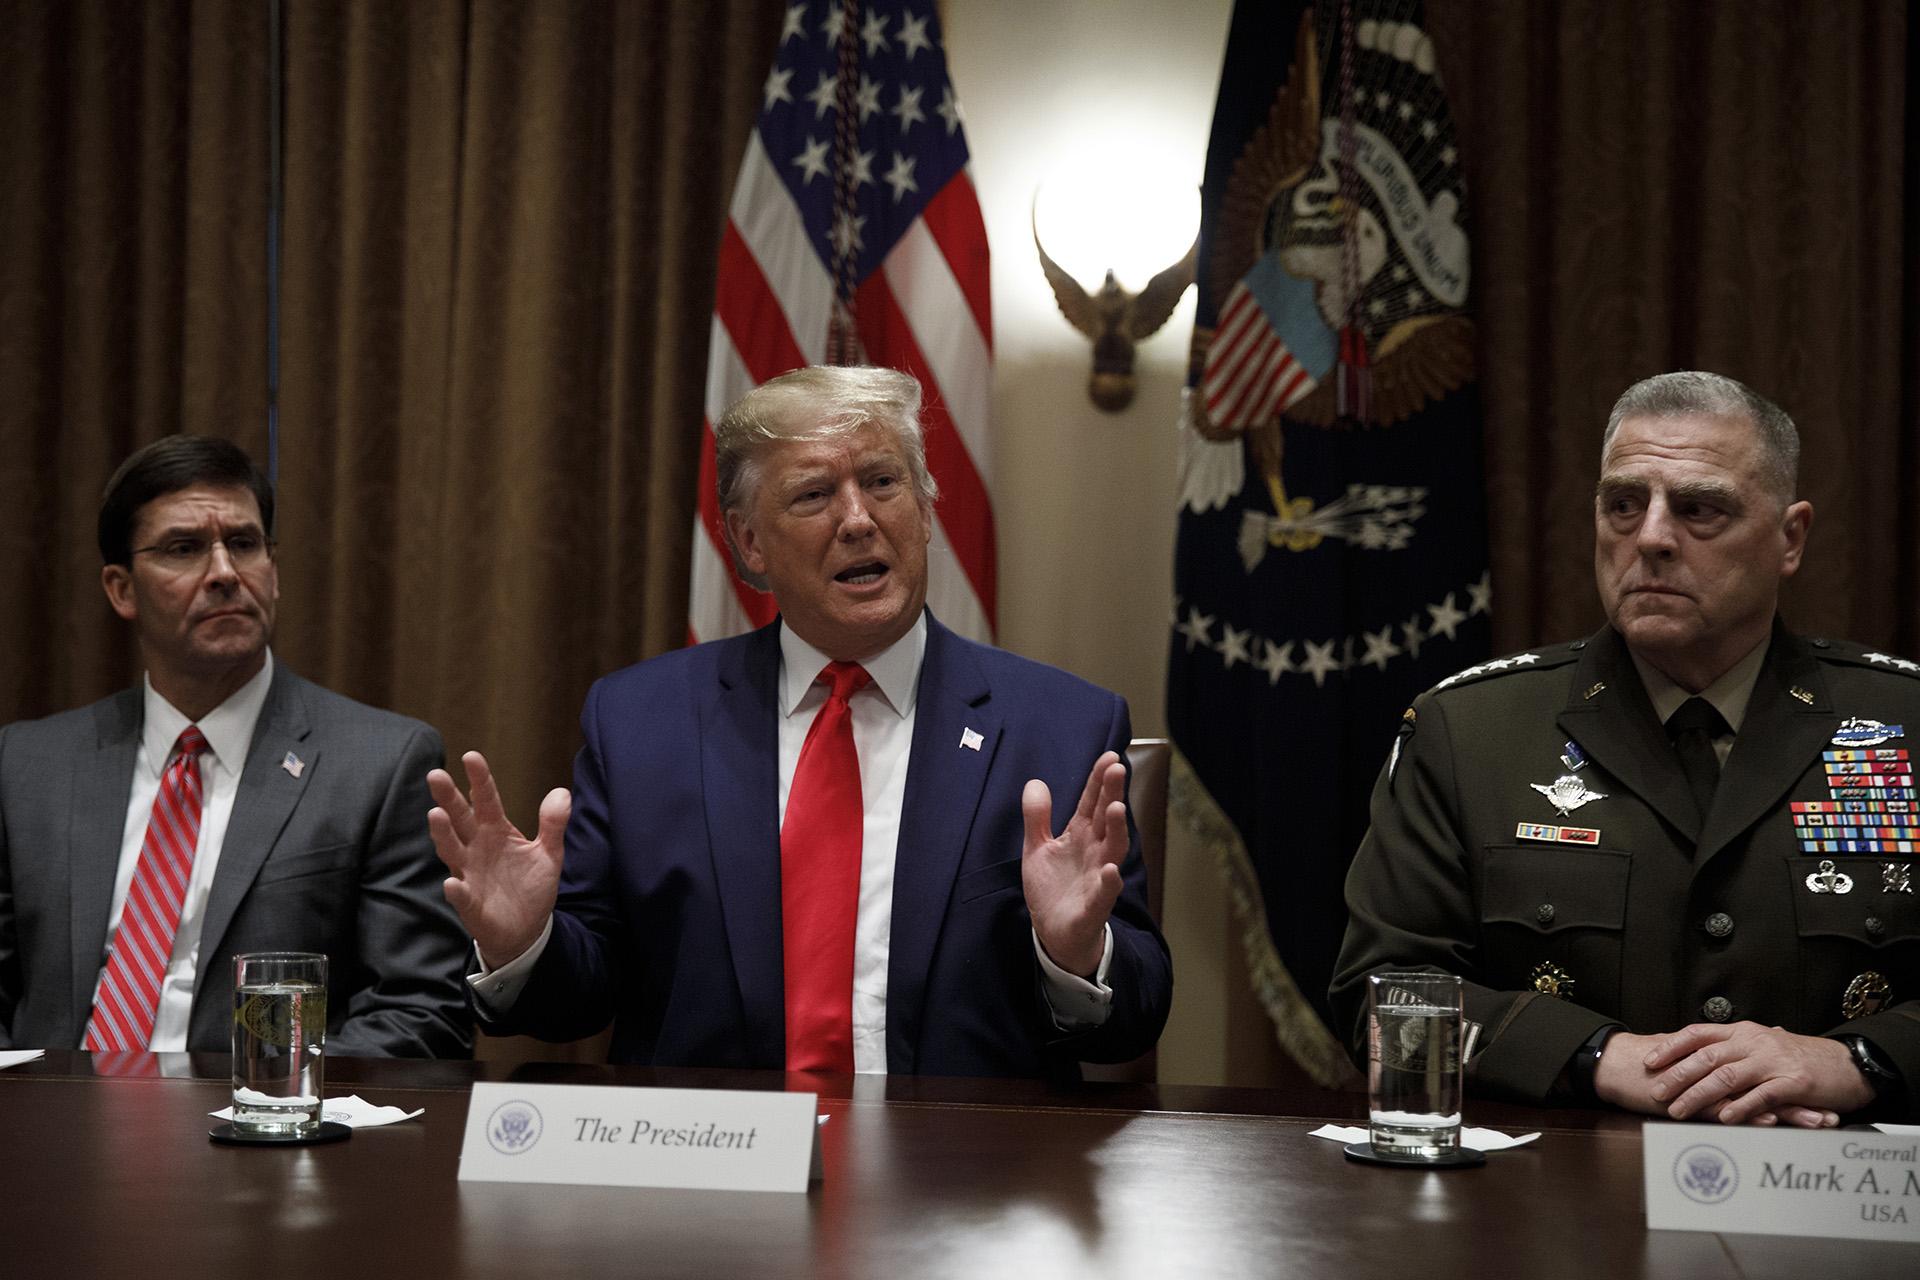 President Donald Trump, joined by from left, Defense Secretary Mark Esper, and Chairman of the Joint Chiefs of Staff Gen. Mark Milley, speaks to media during a briefing with senior military leaders in the Cabinet Room at the White House in Washington, Monday, Oct. 7, 2019. (AP Photo / Carolyn Kaster)